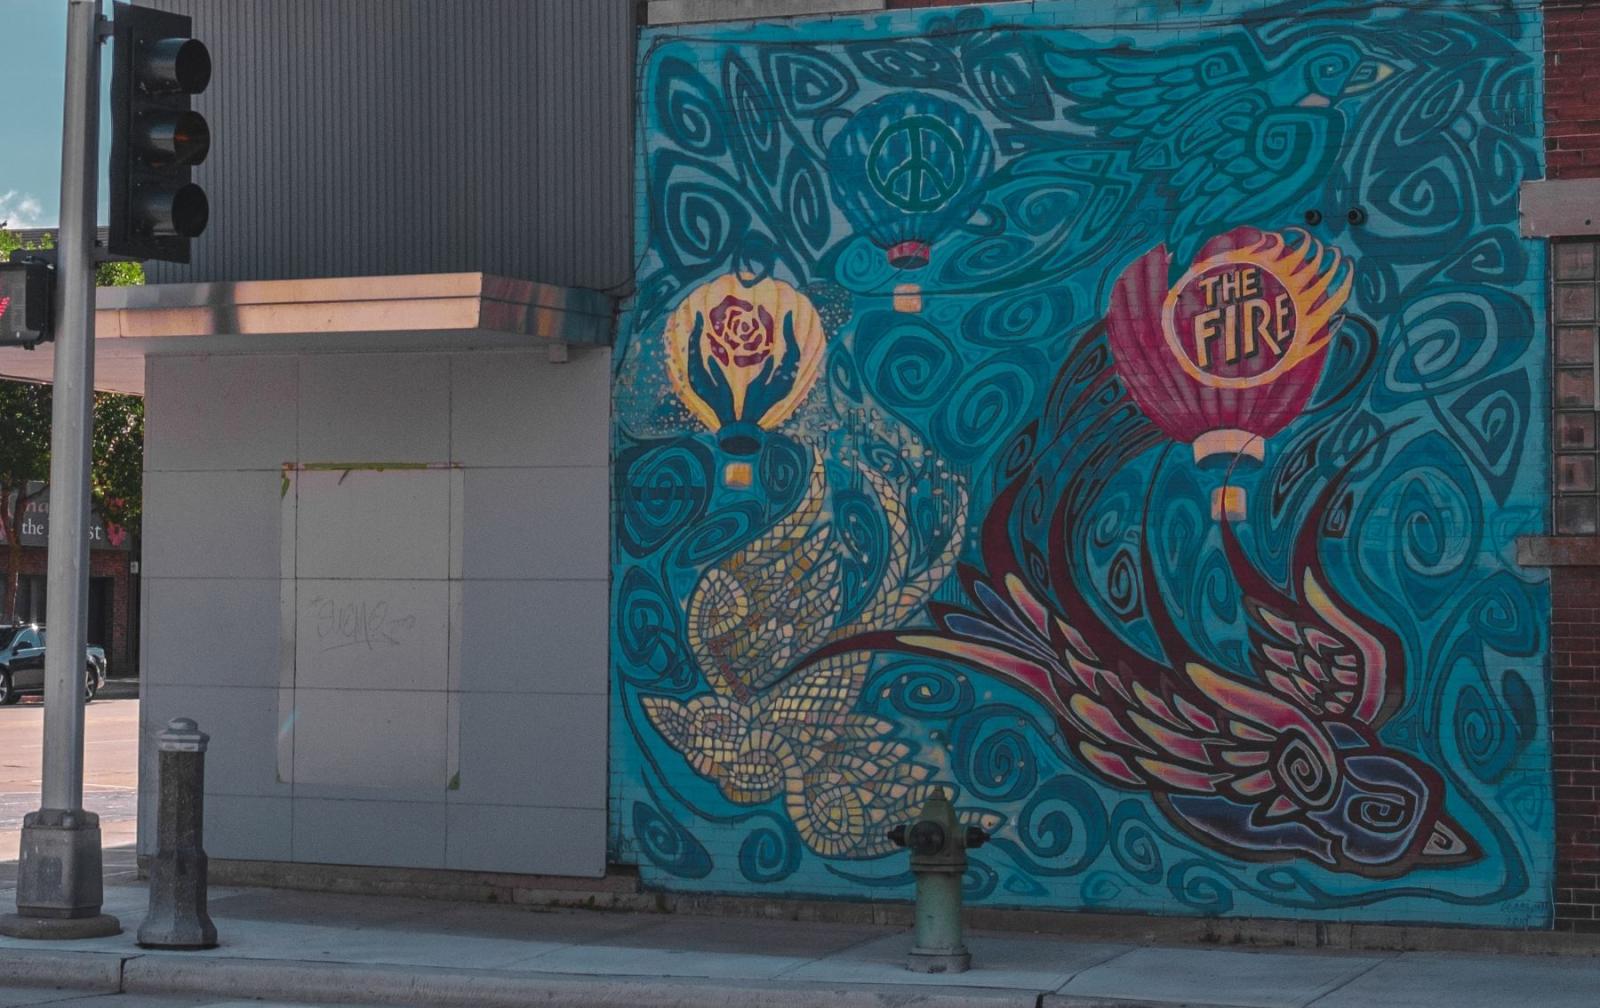 mural with various designs on a vibrant blue background, and the words "The Fire" standing out of a torched flame